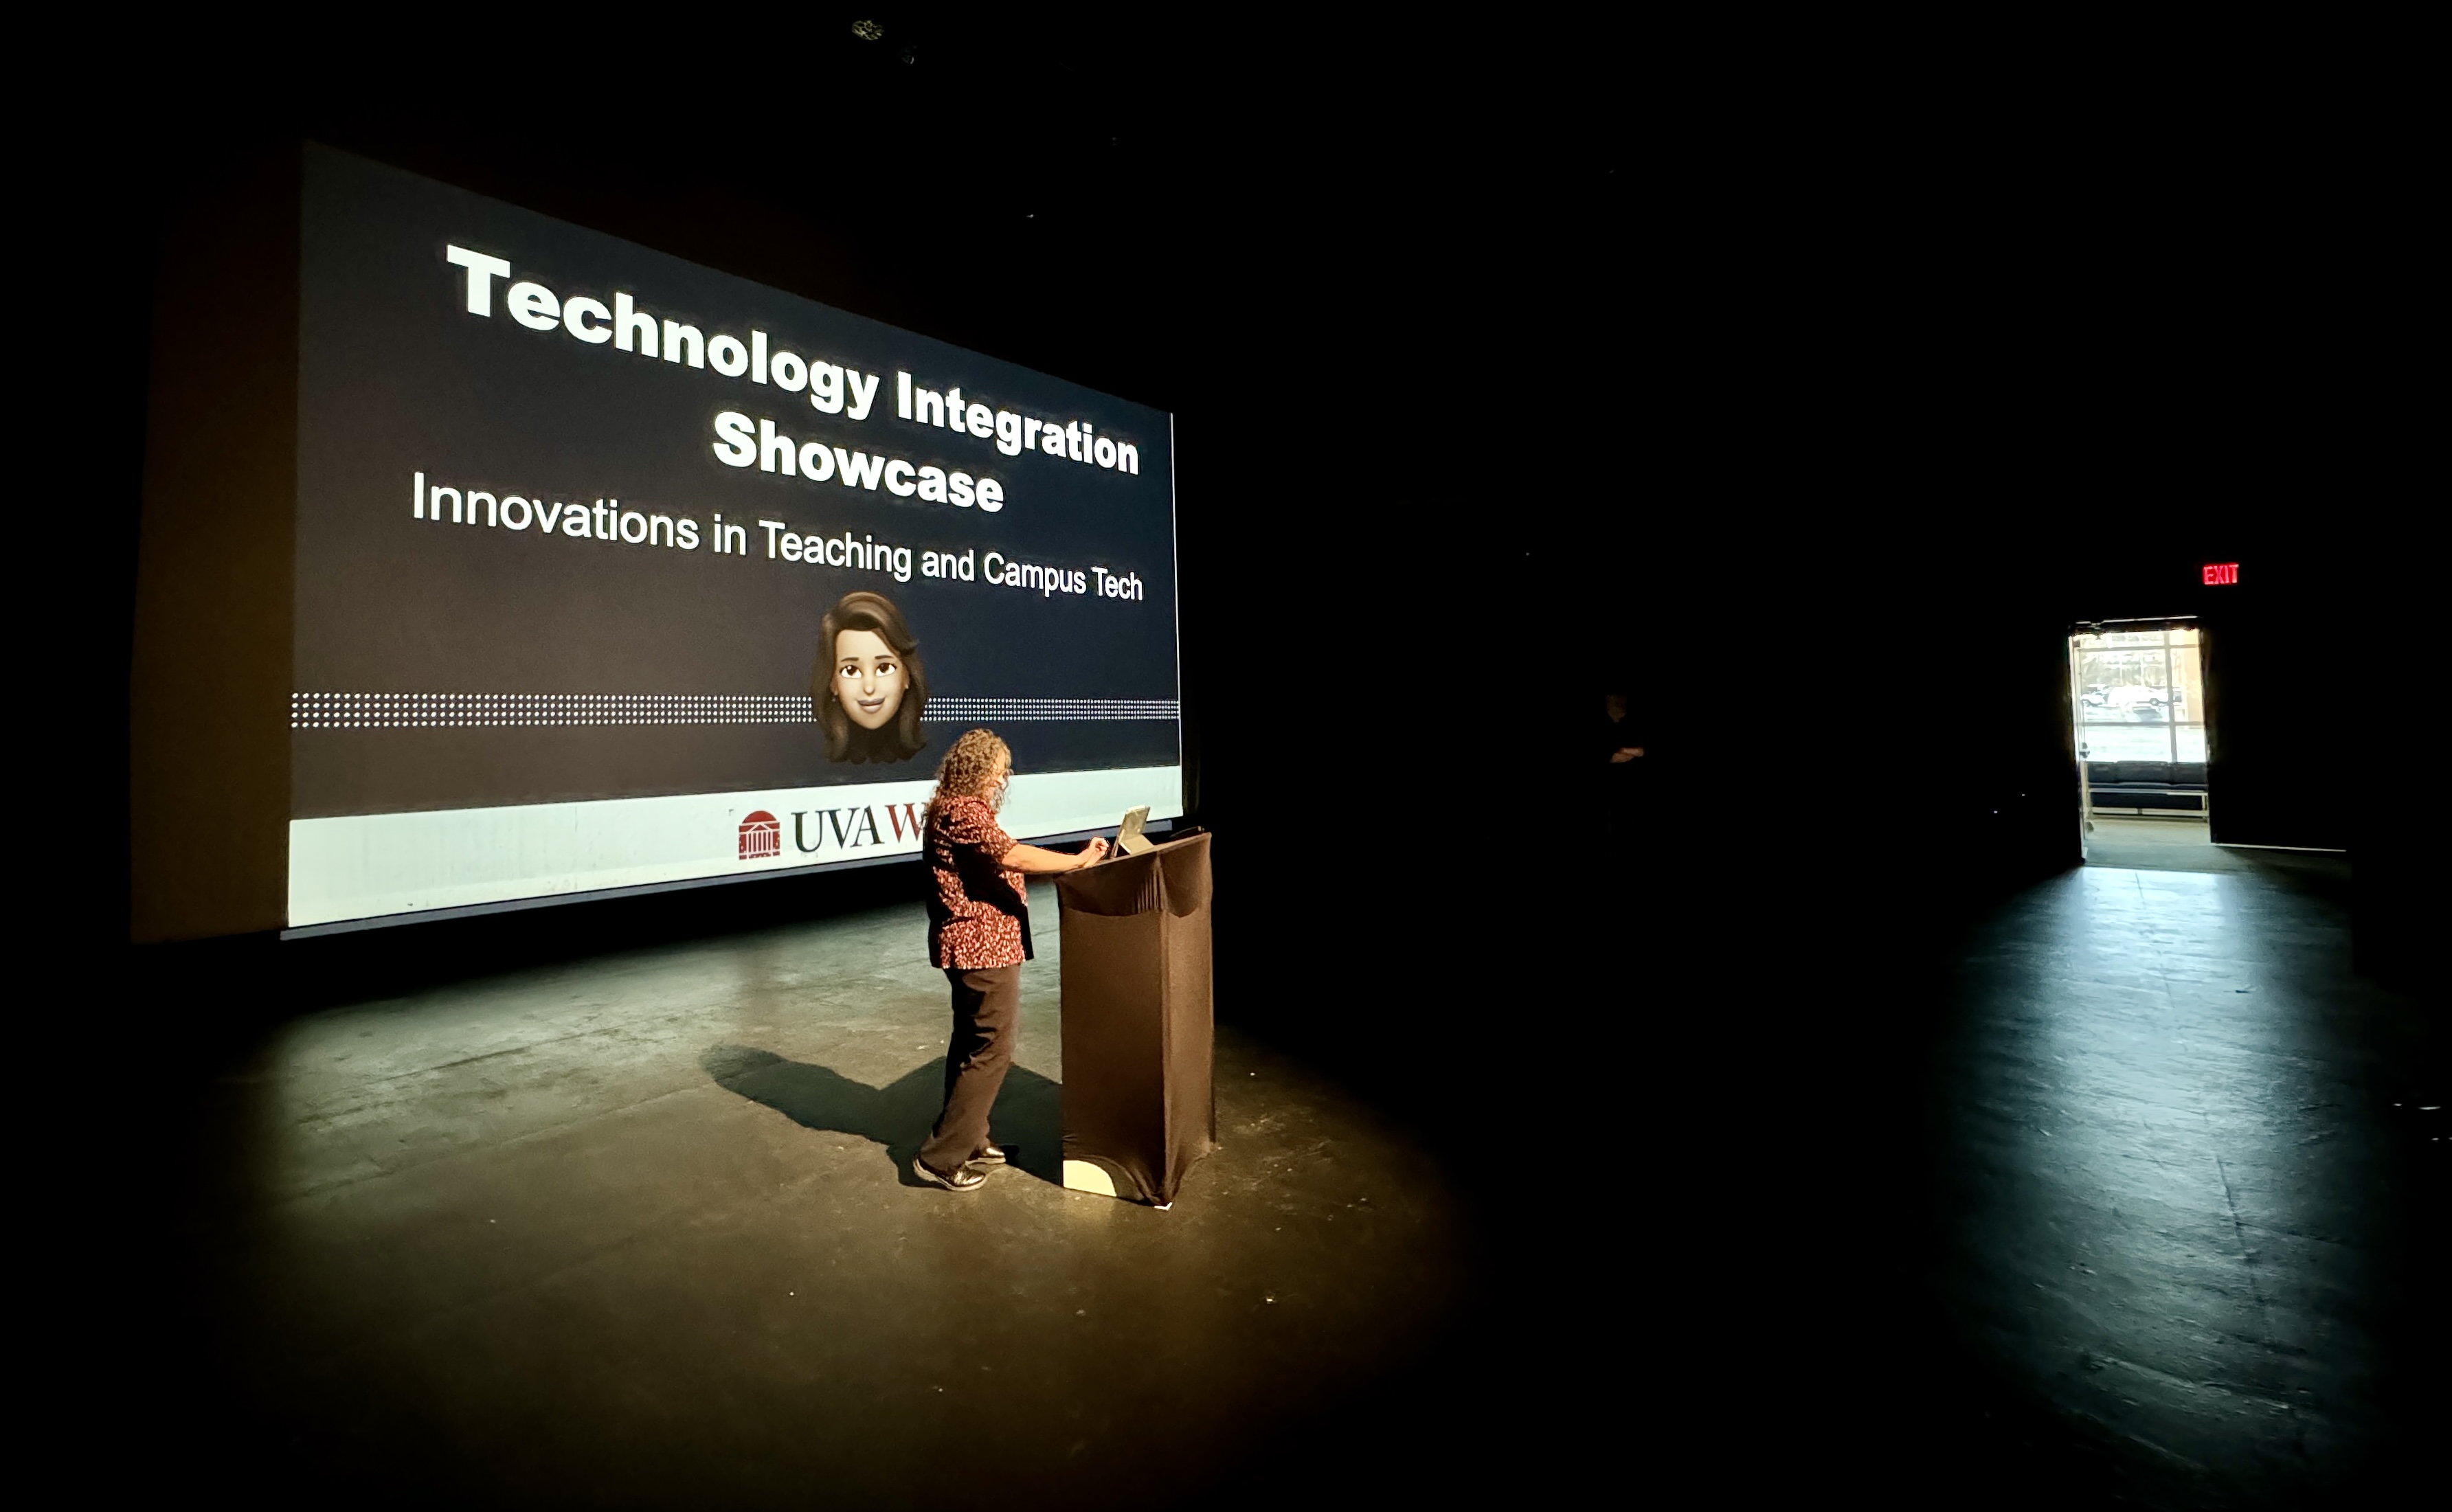 Presenter standing at a lectern with a large projector screen behind. Technology Innovation Showcase is displayed on screen.